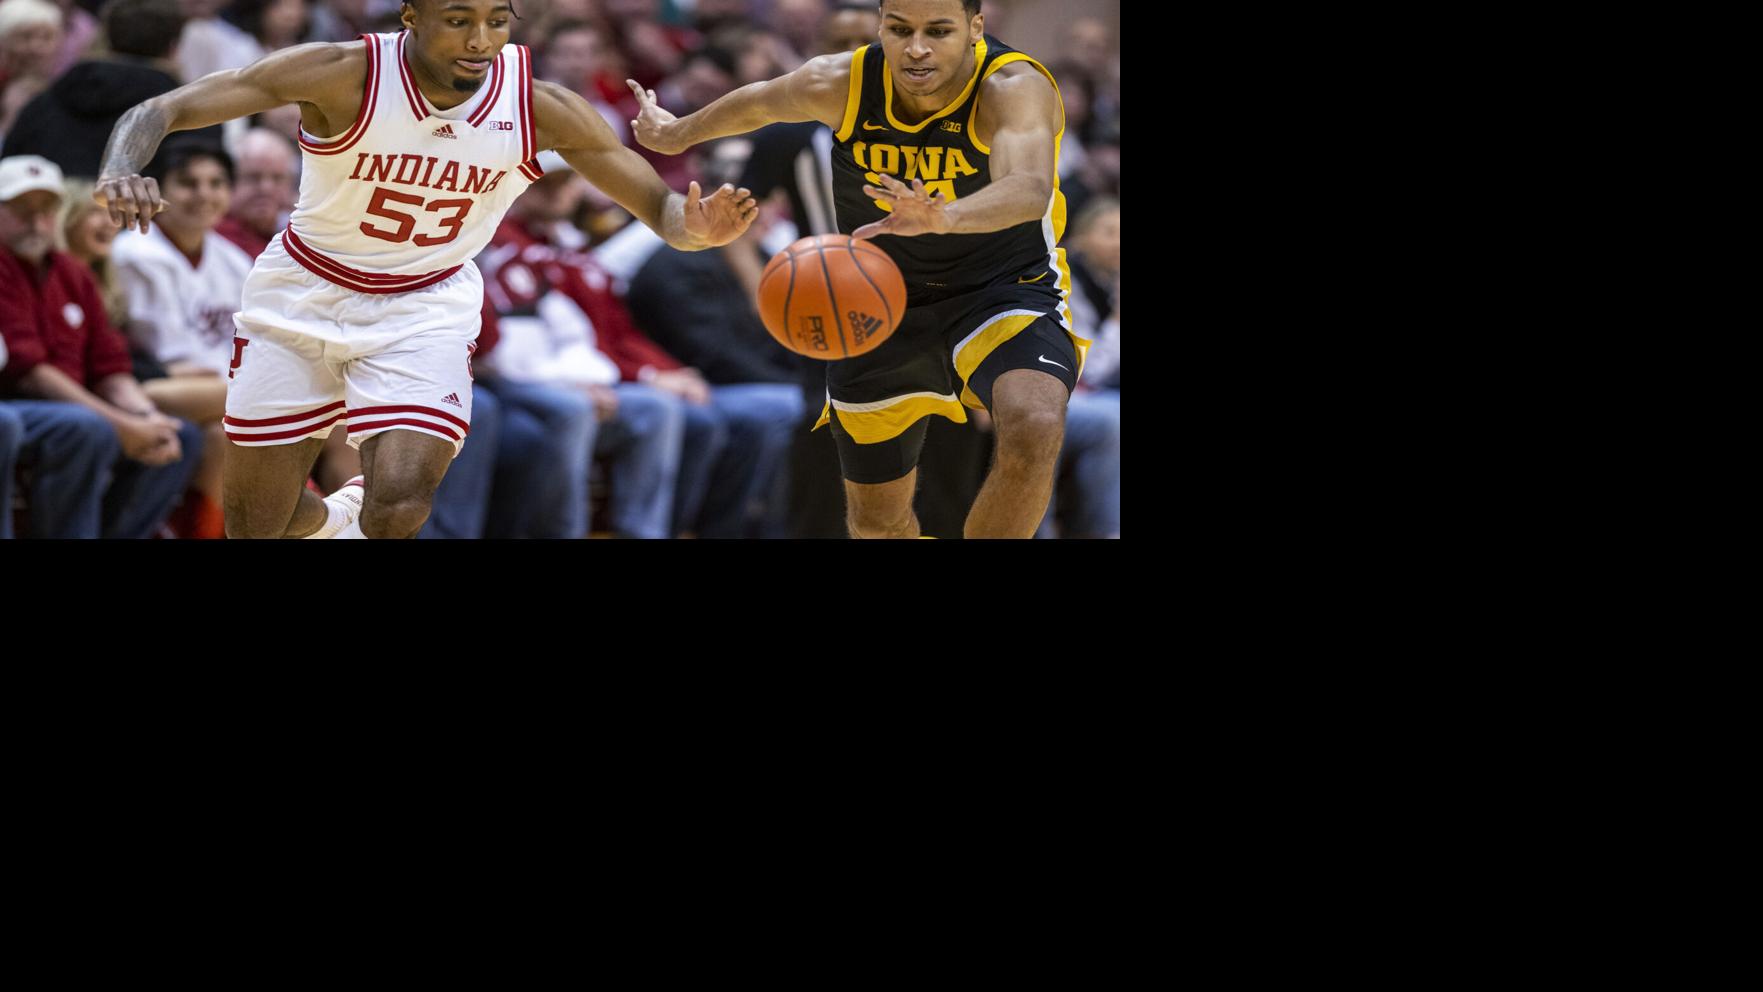 Murray scores 26 to lead Iowa past No. 15 Indiana 90-68